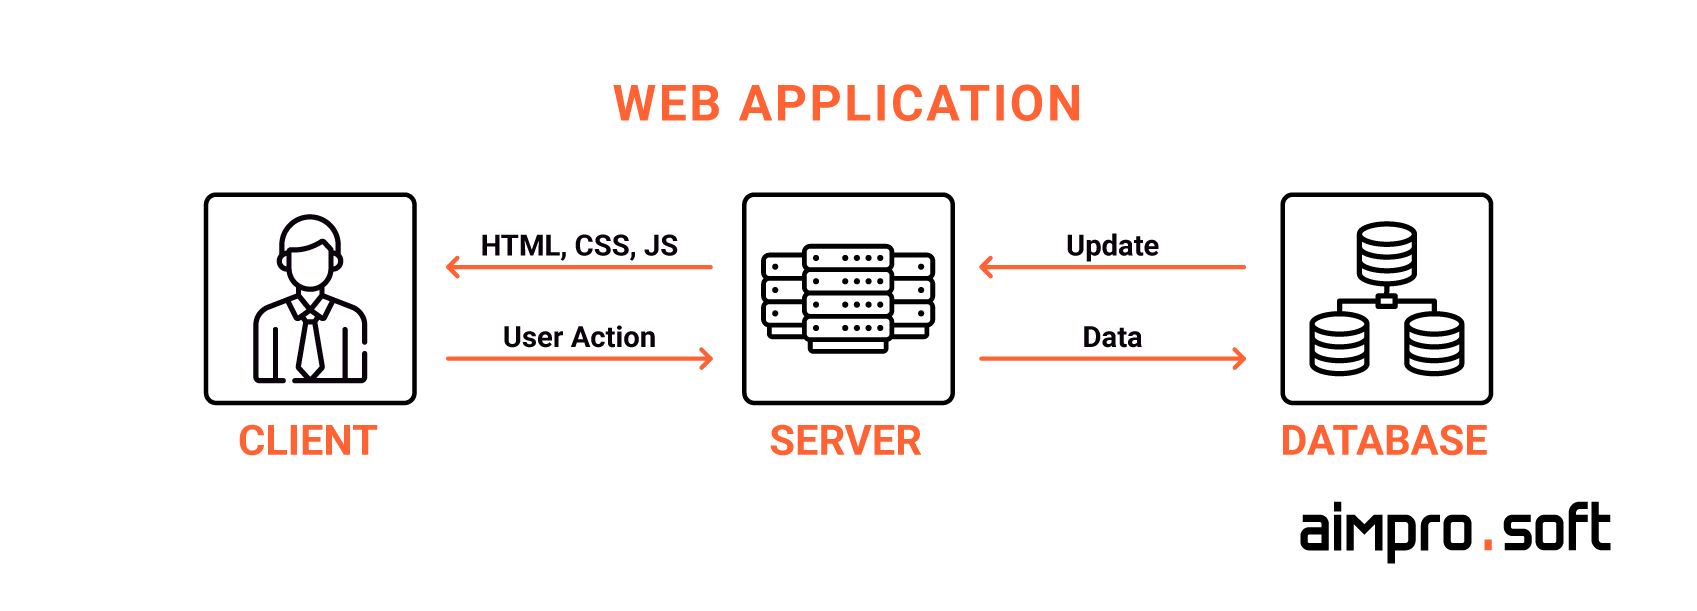 Web applications workflow